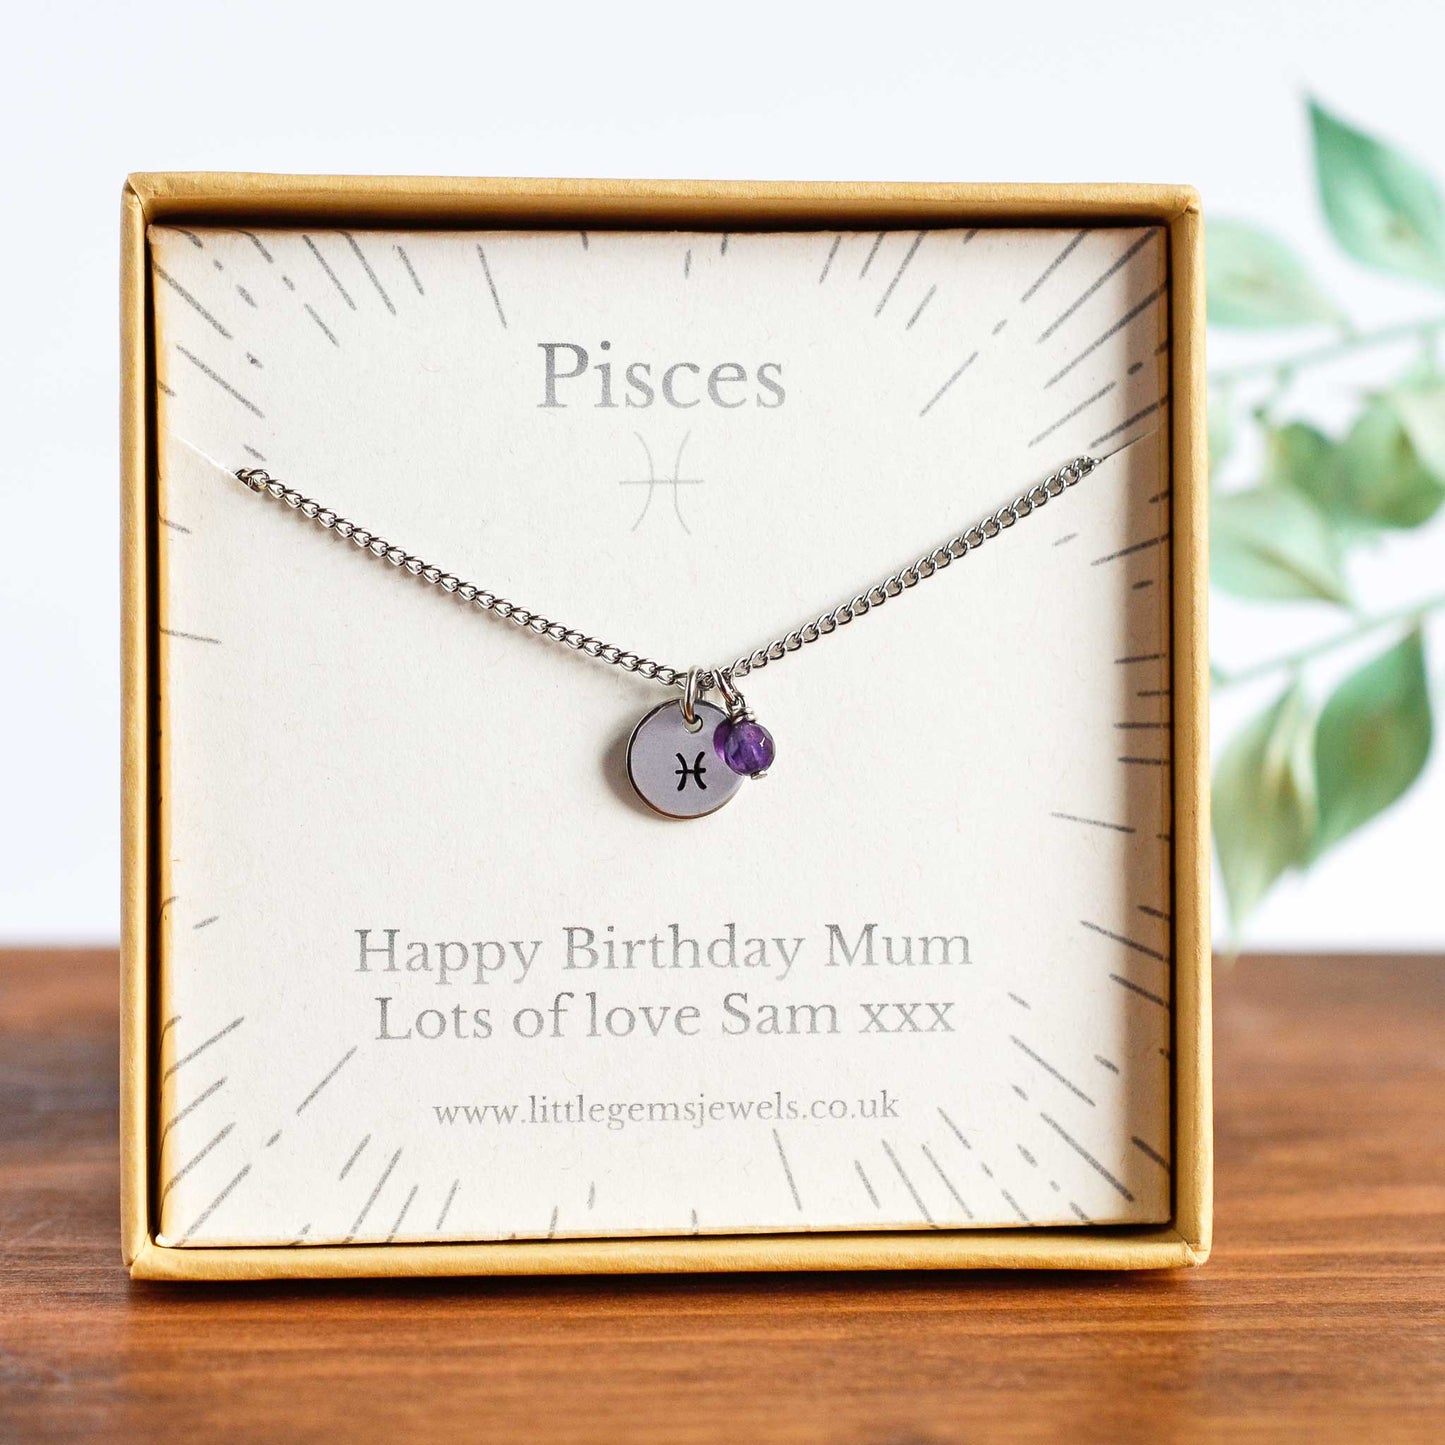 Pisces Zodiac necklace with personalised gift message in eco friendly gift box